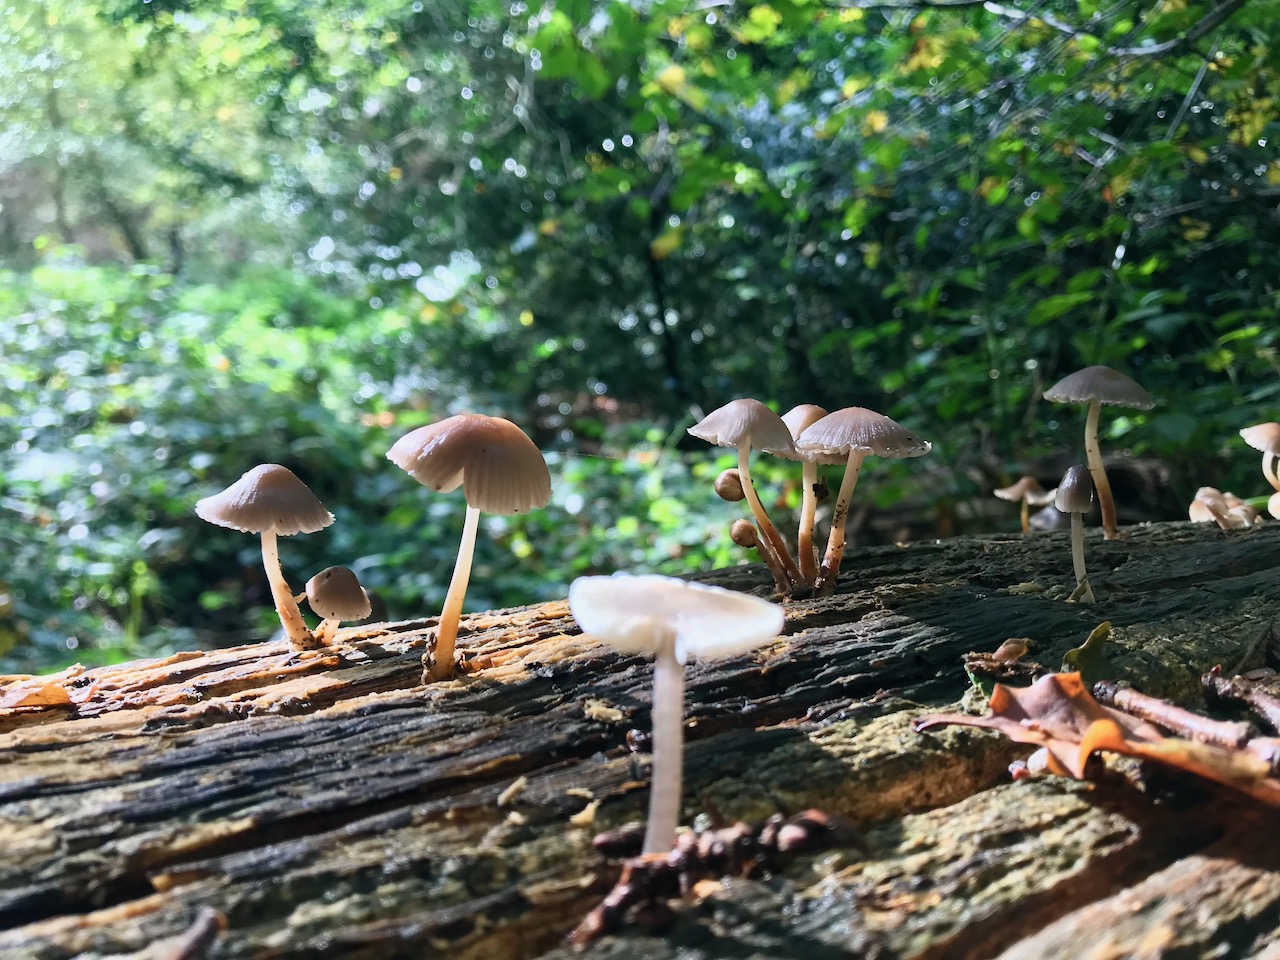 A close-up of many tiny mushrooms growing out of a log.